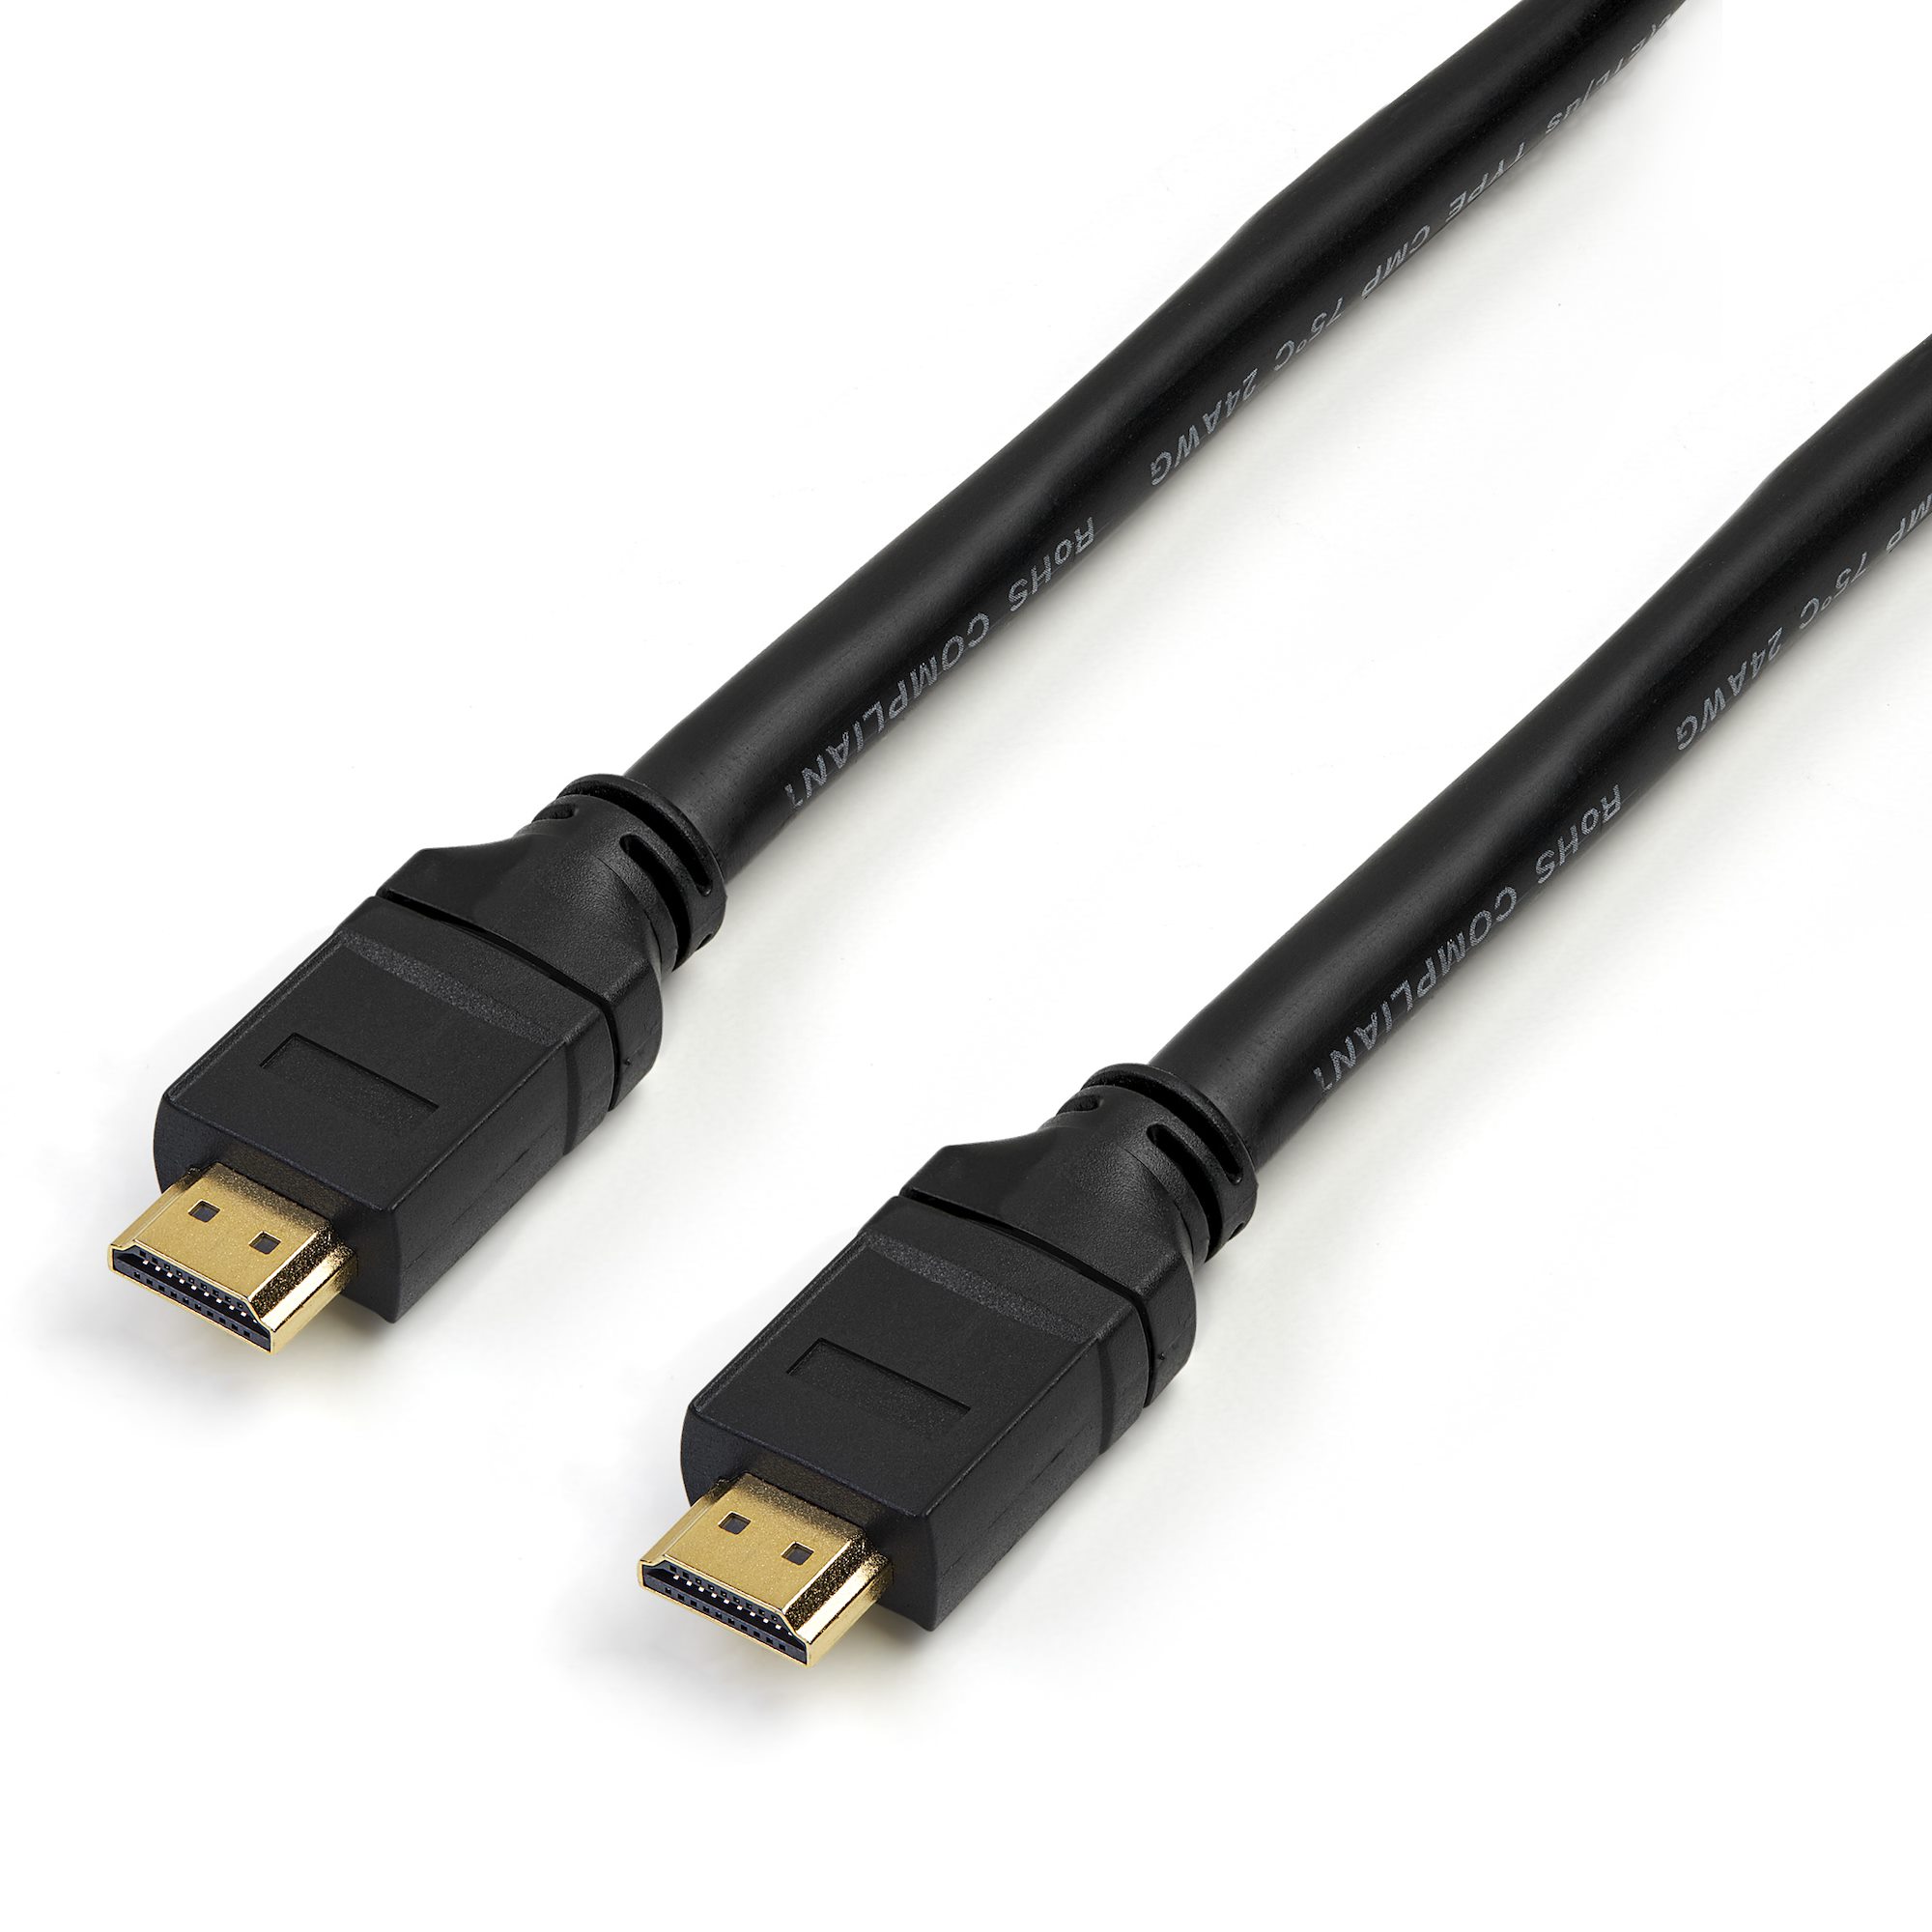 35 ft 10m Plenum-Rated High Speed HDMI Cable – Ultra HD 4k x 2k HDMI – HDMI to HDMI M/M BCI Imaging